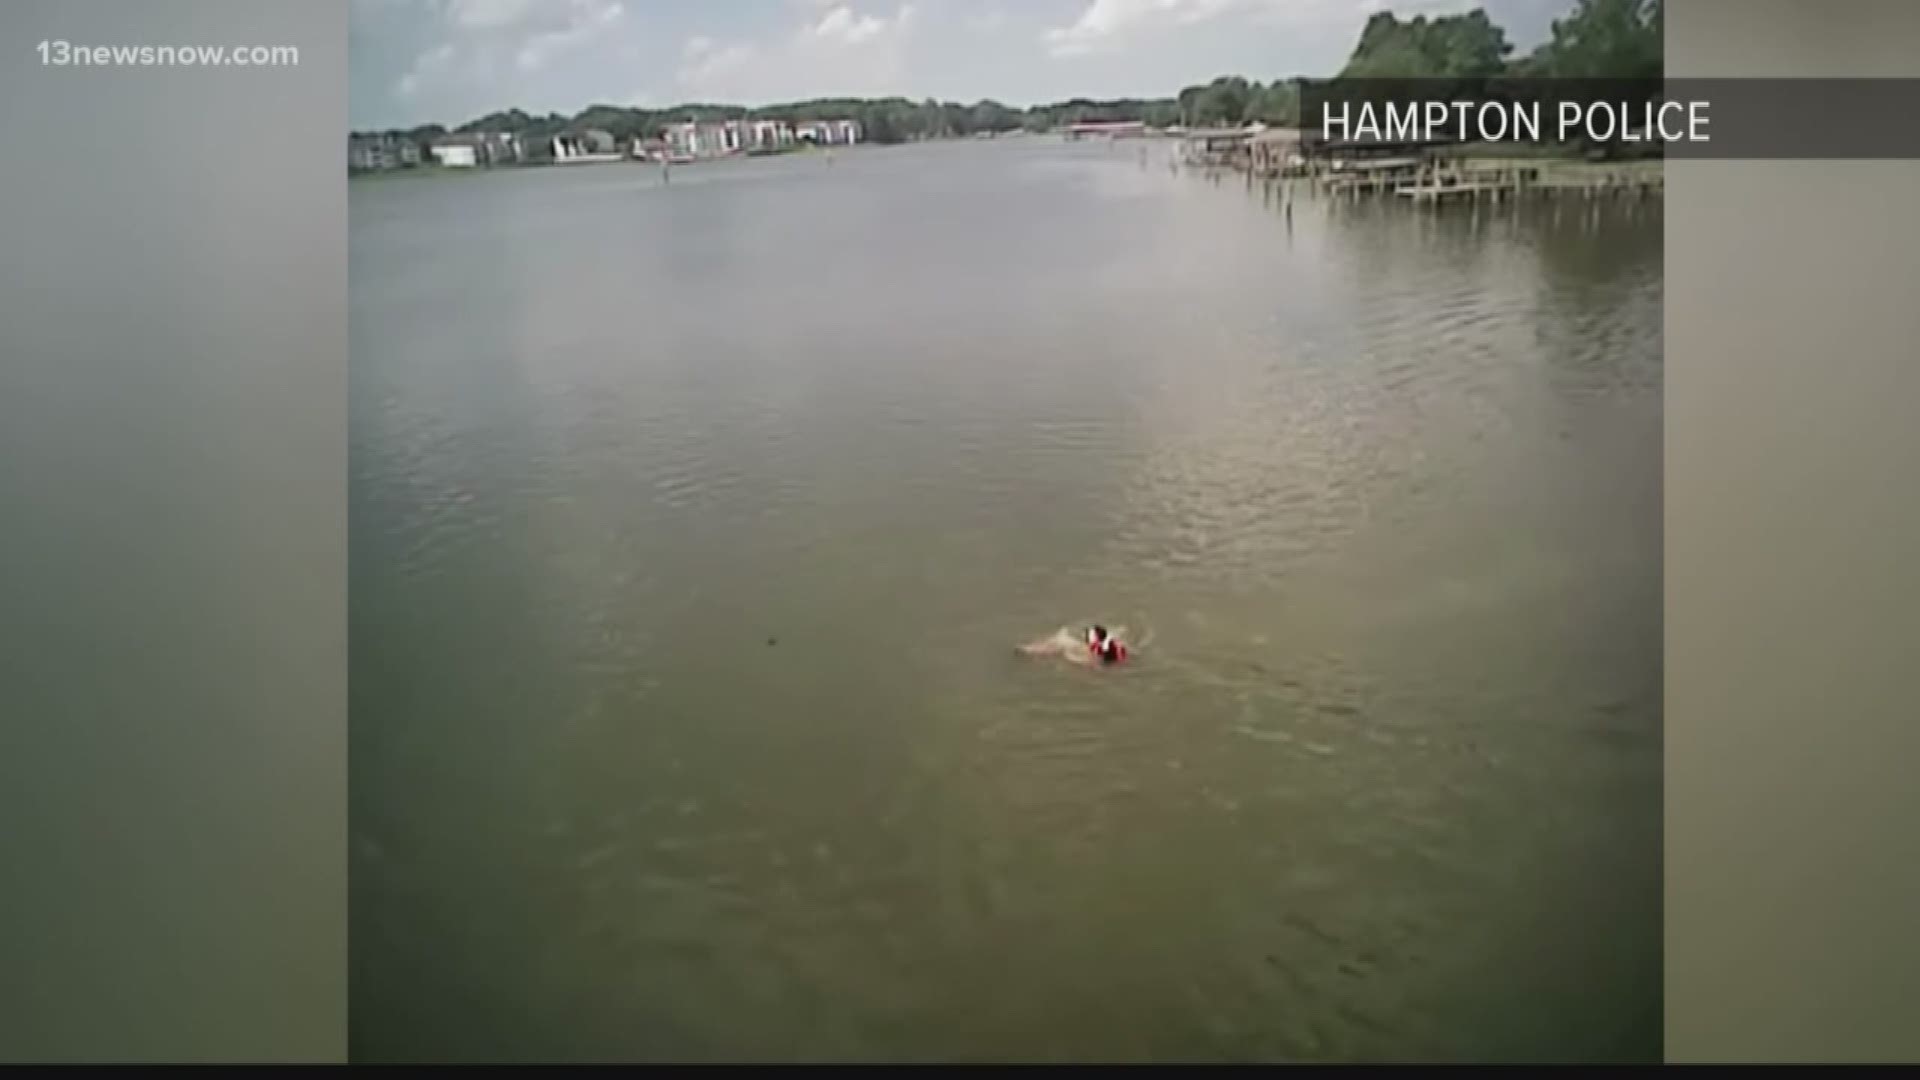 Two Hampton police officers found a man on a bridge threatening to jump. What the officers did next saved that man's life.